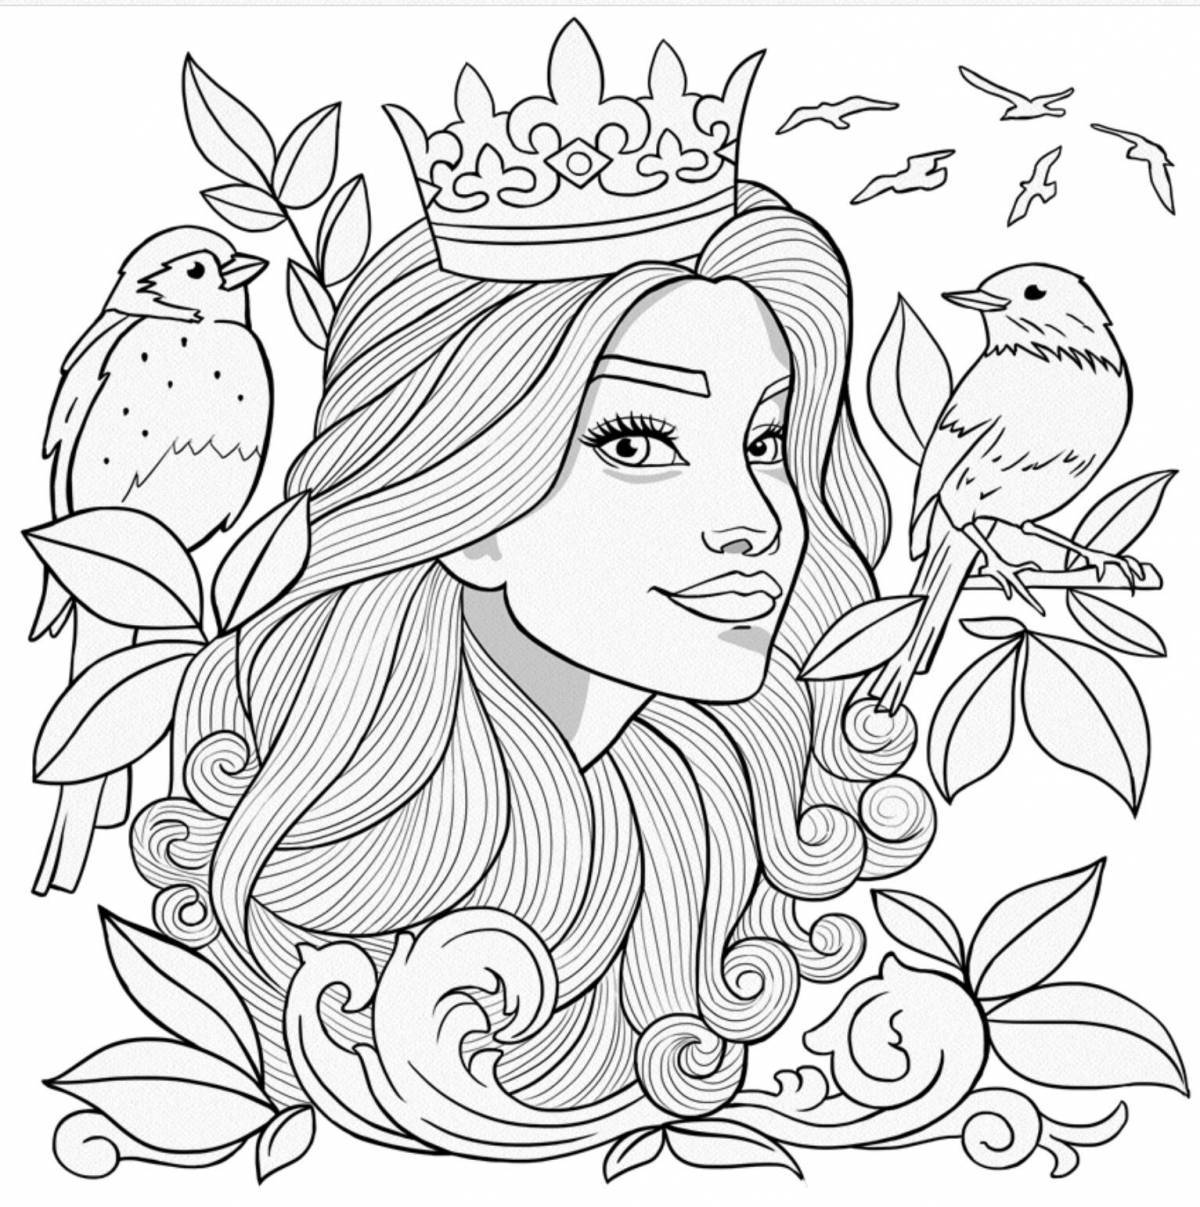 Crazy coloring book for 14 year old girls